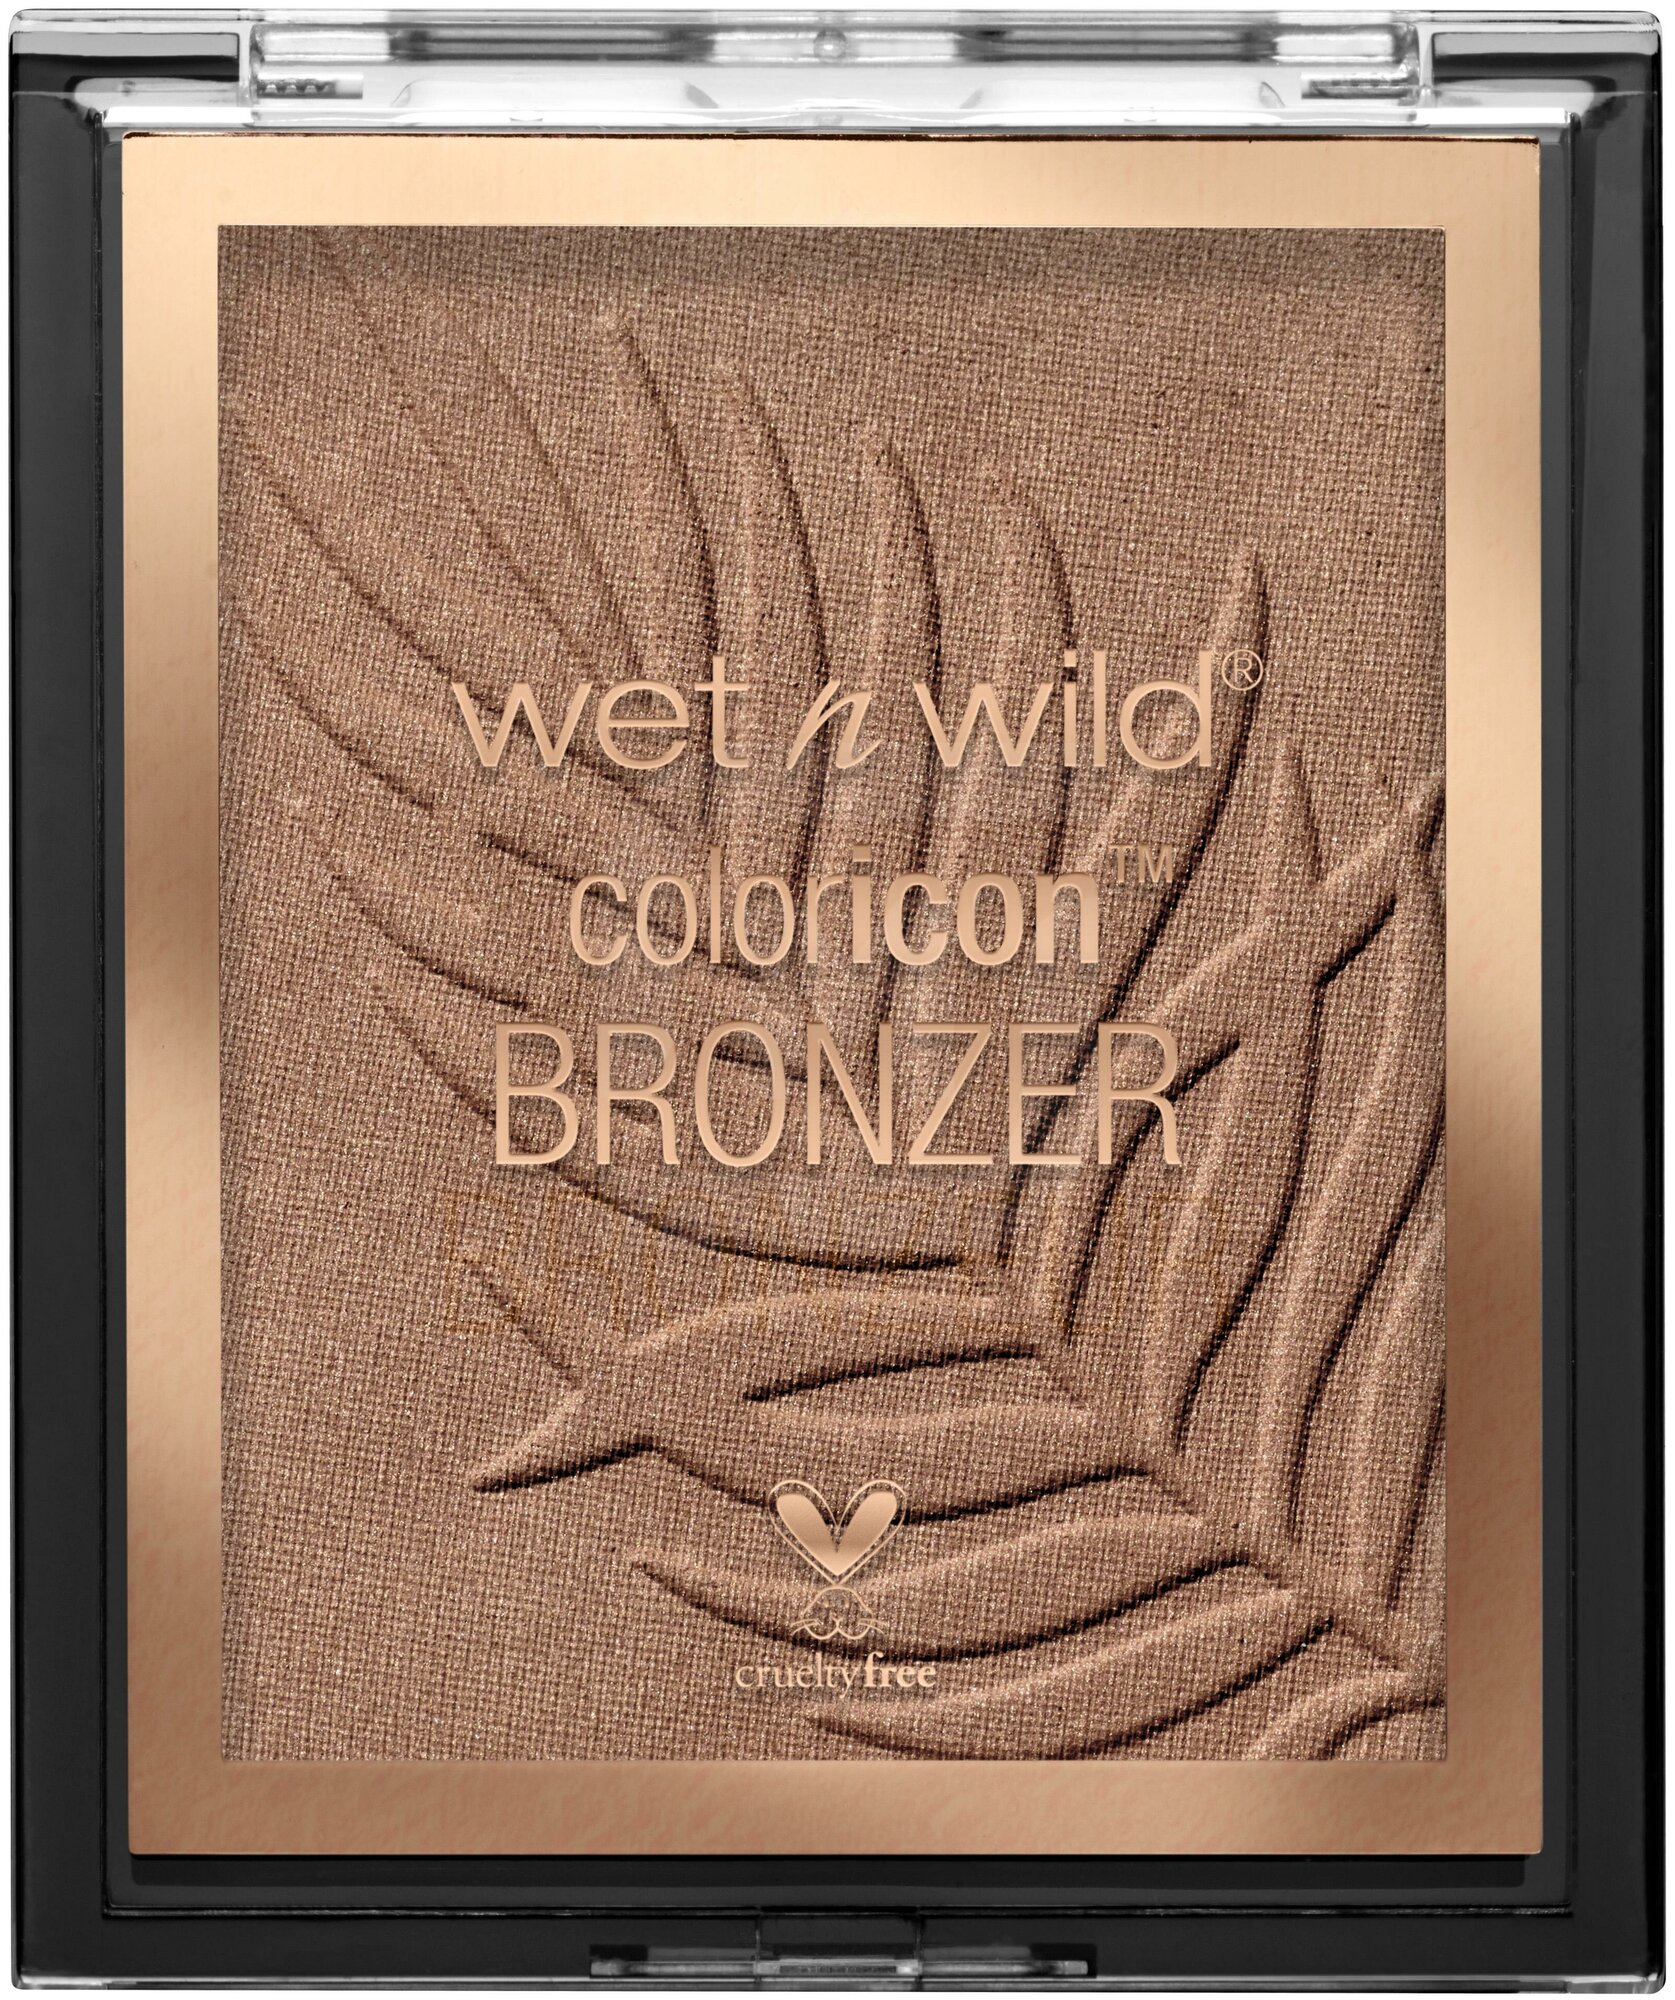 Wet n Wild Color Icon Bronzer Товар Бронзирующая пудра для лица sunset striptease, 11 gr Markwins Beauty Products CN - фото №8